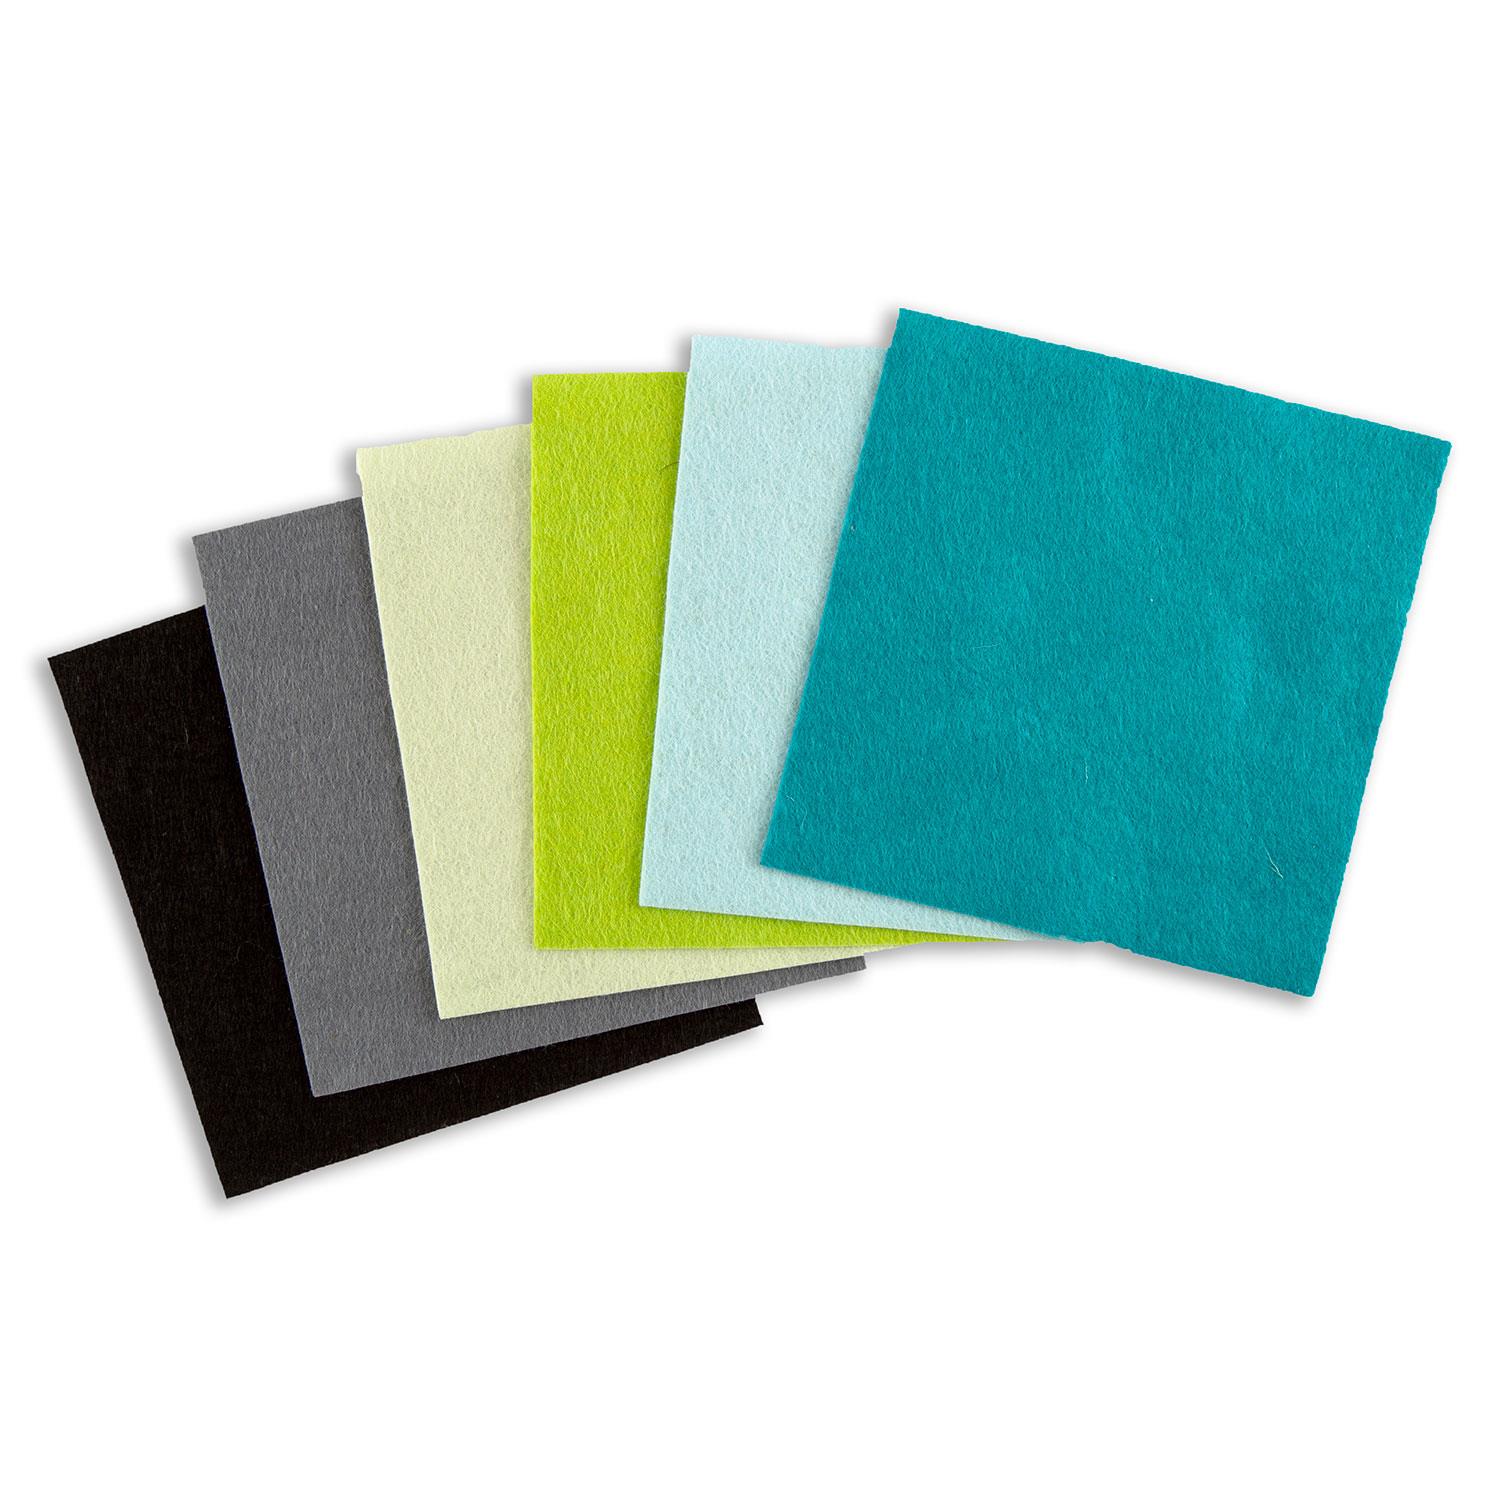 Felt by Clarity Pack of 6 Non-Adhesive Mixed Colour Felt 6x6" Squares Pick N Mix - Pick Any 2 - Funky Leaf